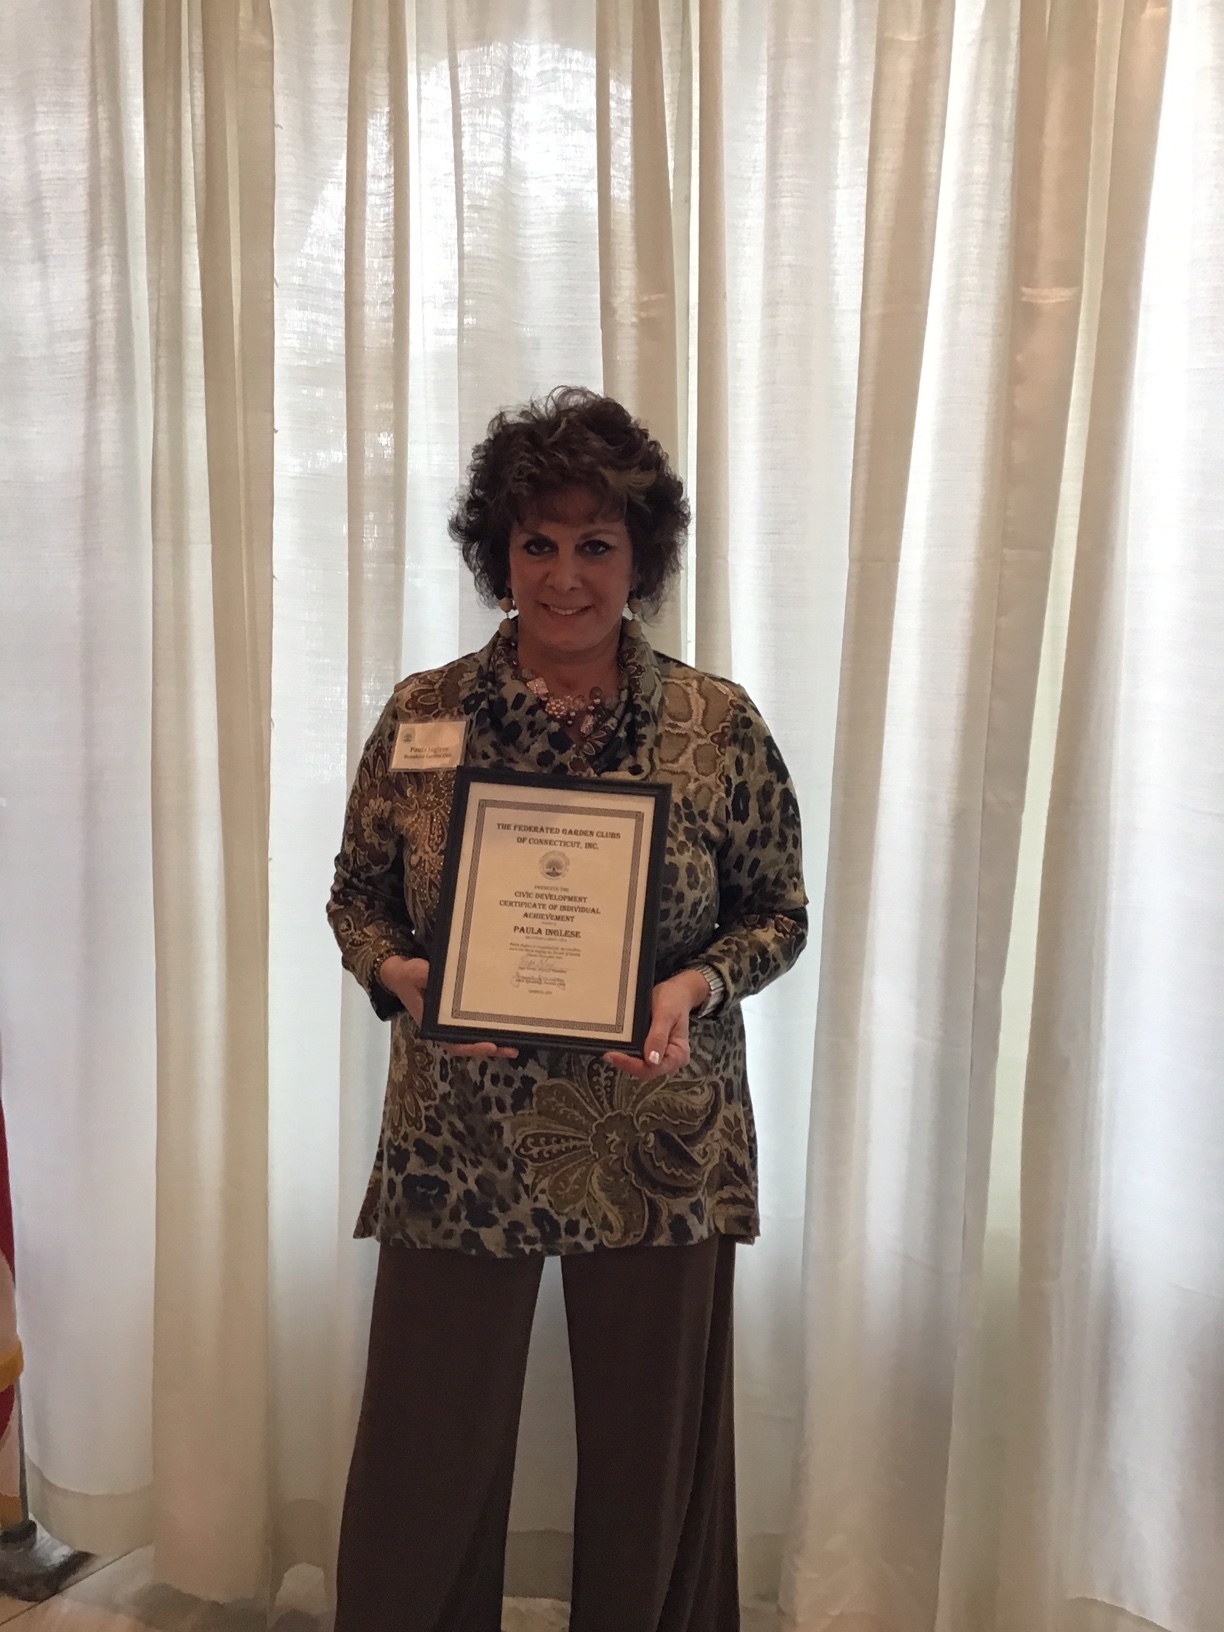 Paula Inglese received an Individual Certificate of Achievement, Civic Creativity Award, for her excellence and creativity in staging at the Breath of Spring Flower Show held in Hartford in February.